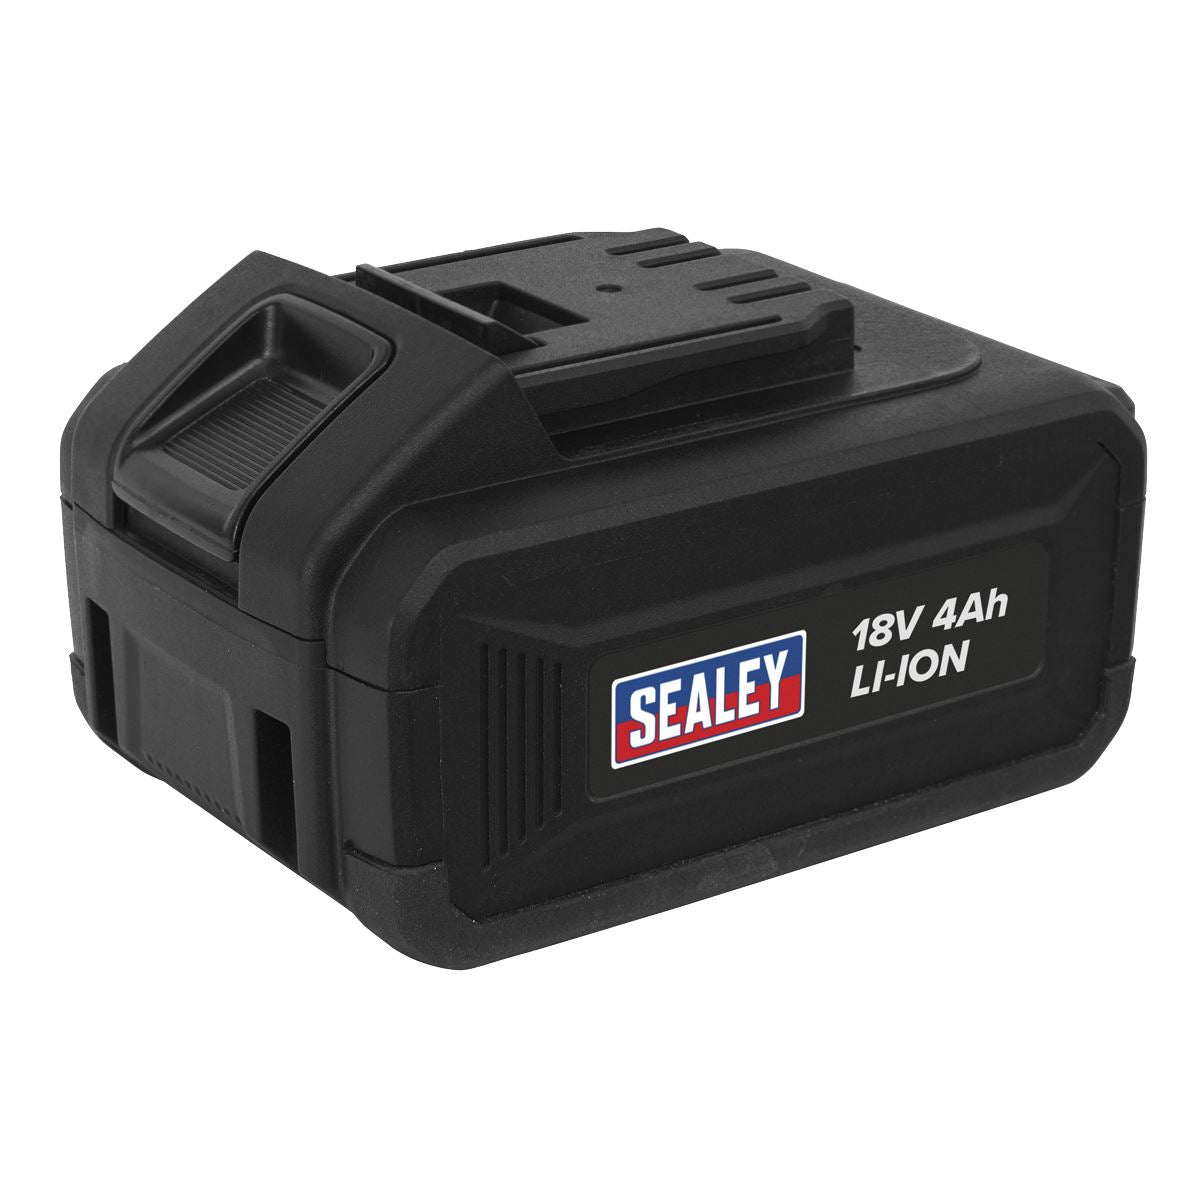 Sealey Power Tool Battery 18V 4Ah Lithium-ion for CP1812